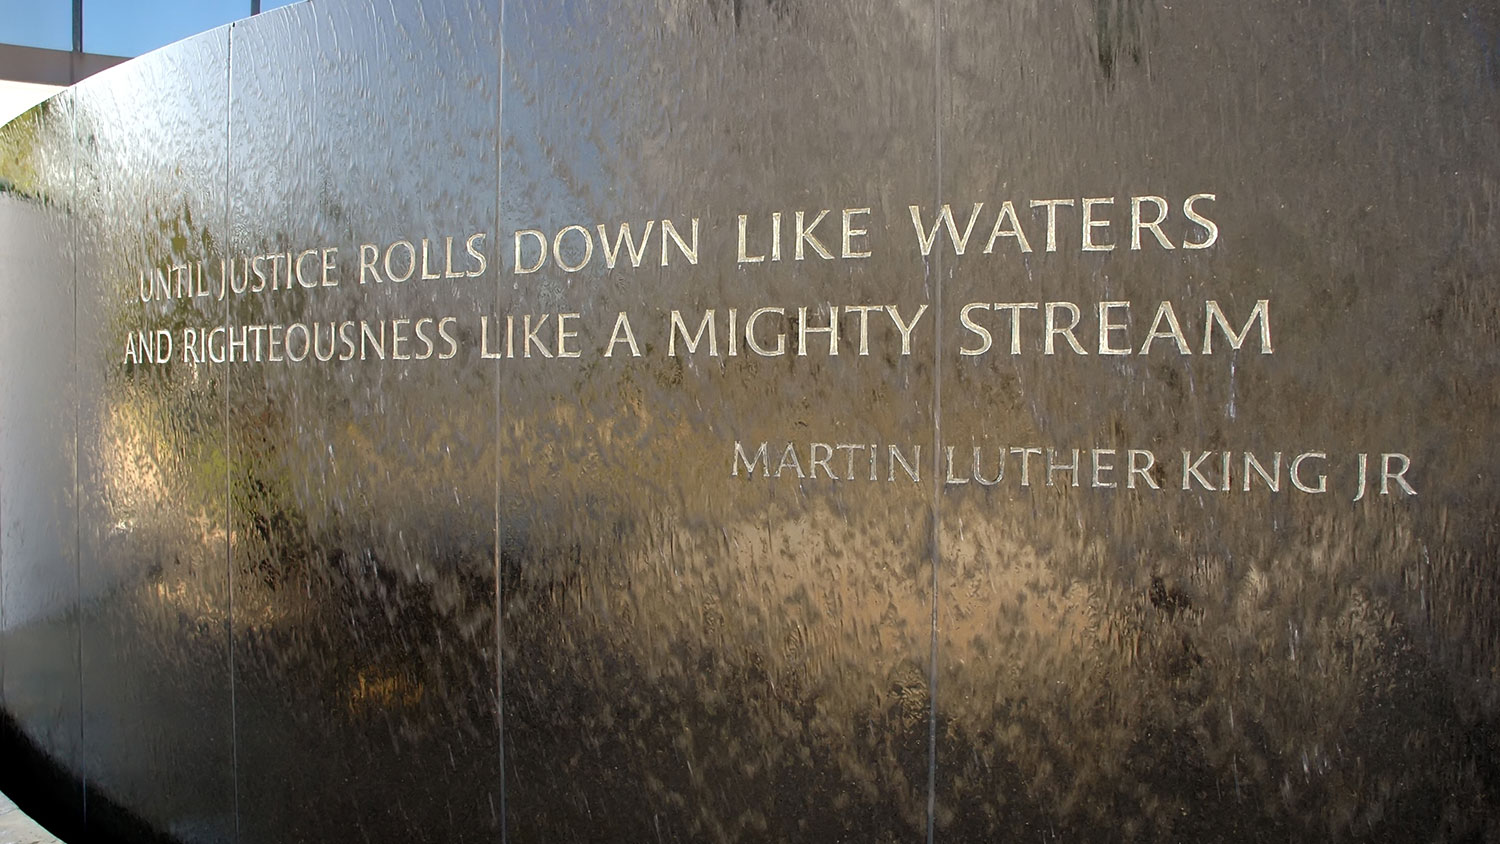 MLK memorial wall with quote